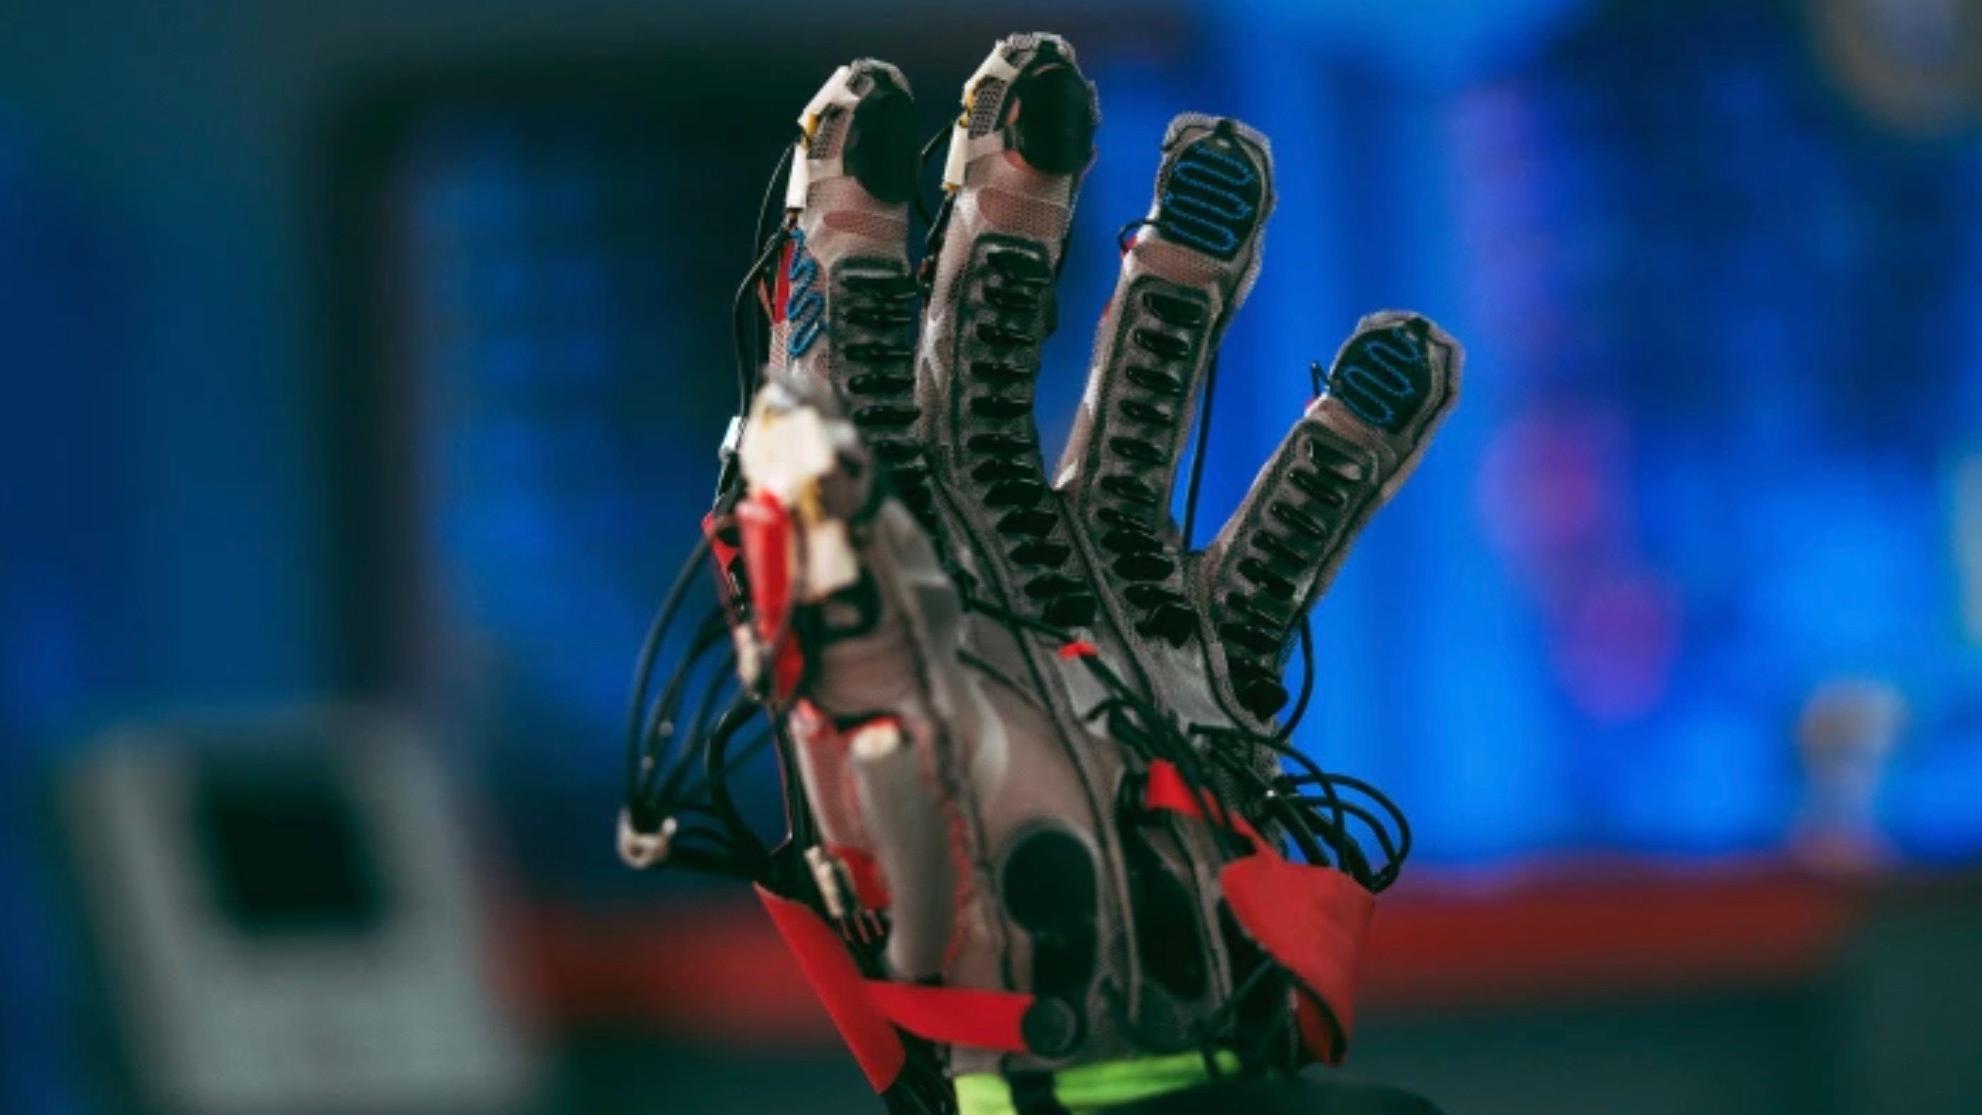 Meta (formerly Facebook) unveiled a glove that allows you to experience objects in virtual reality